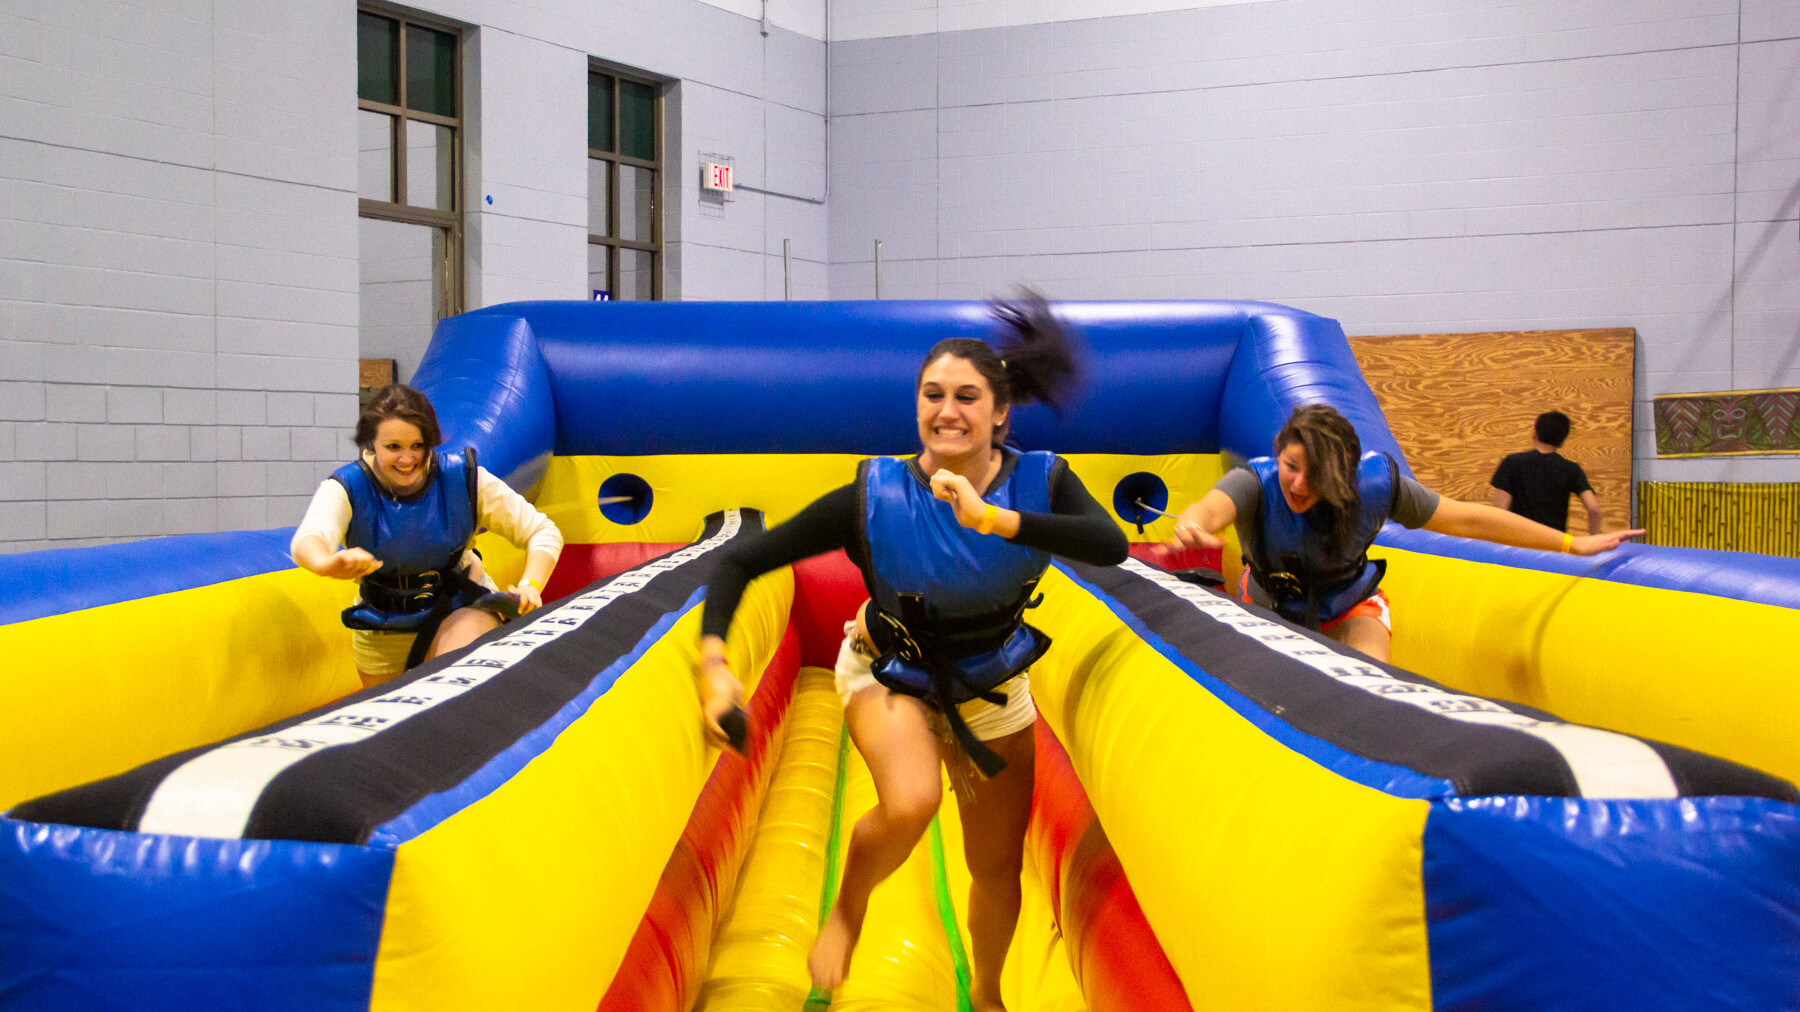 A group of friends smiling, running and having fun on an inflatable bungee run.